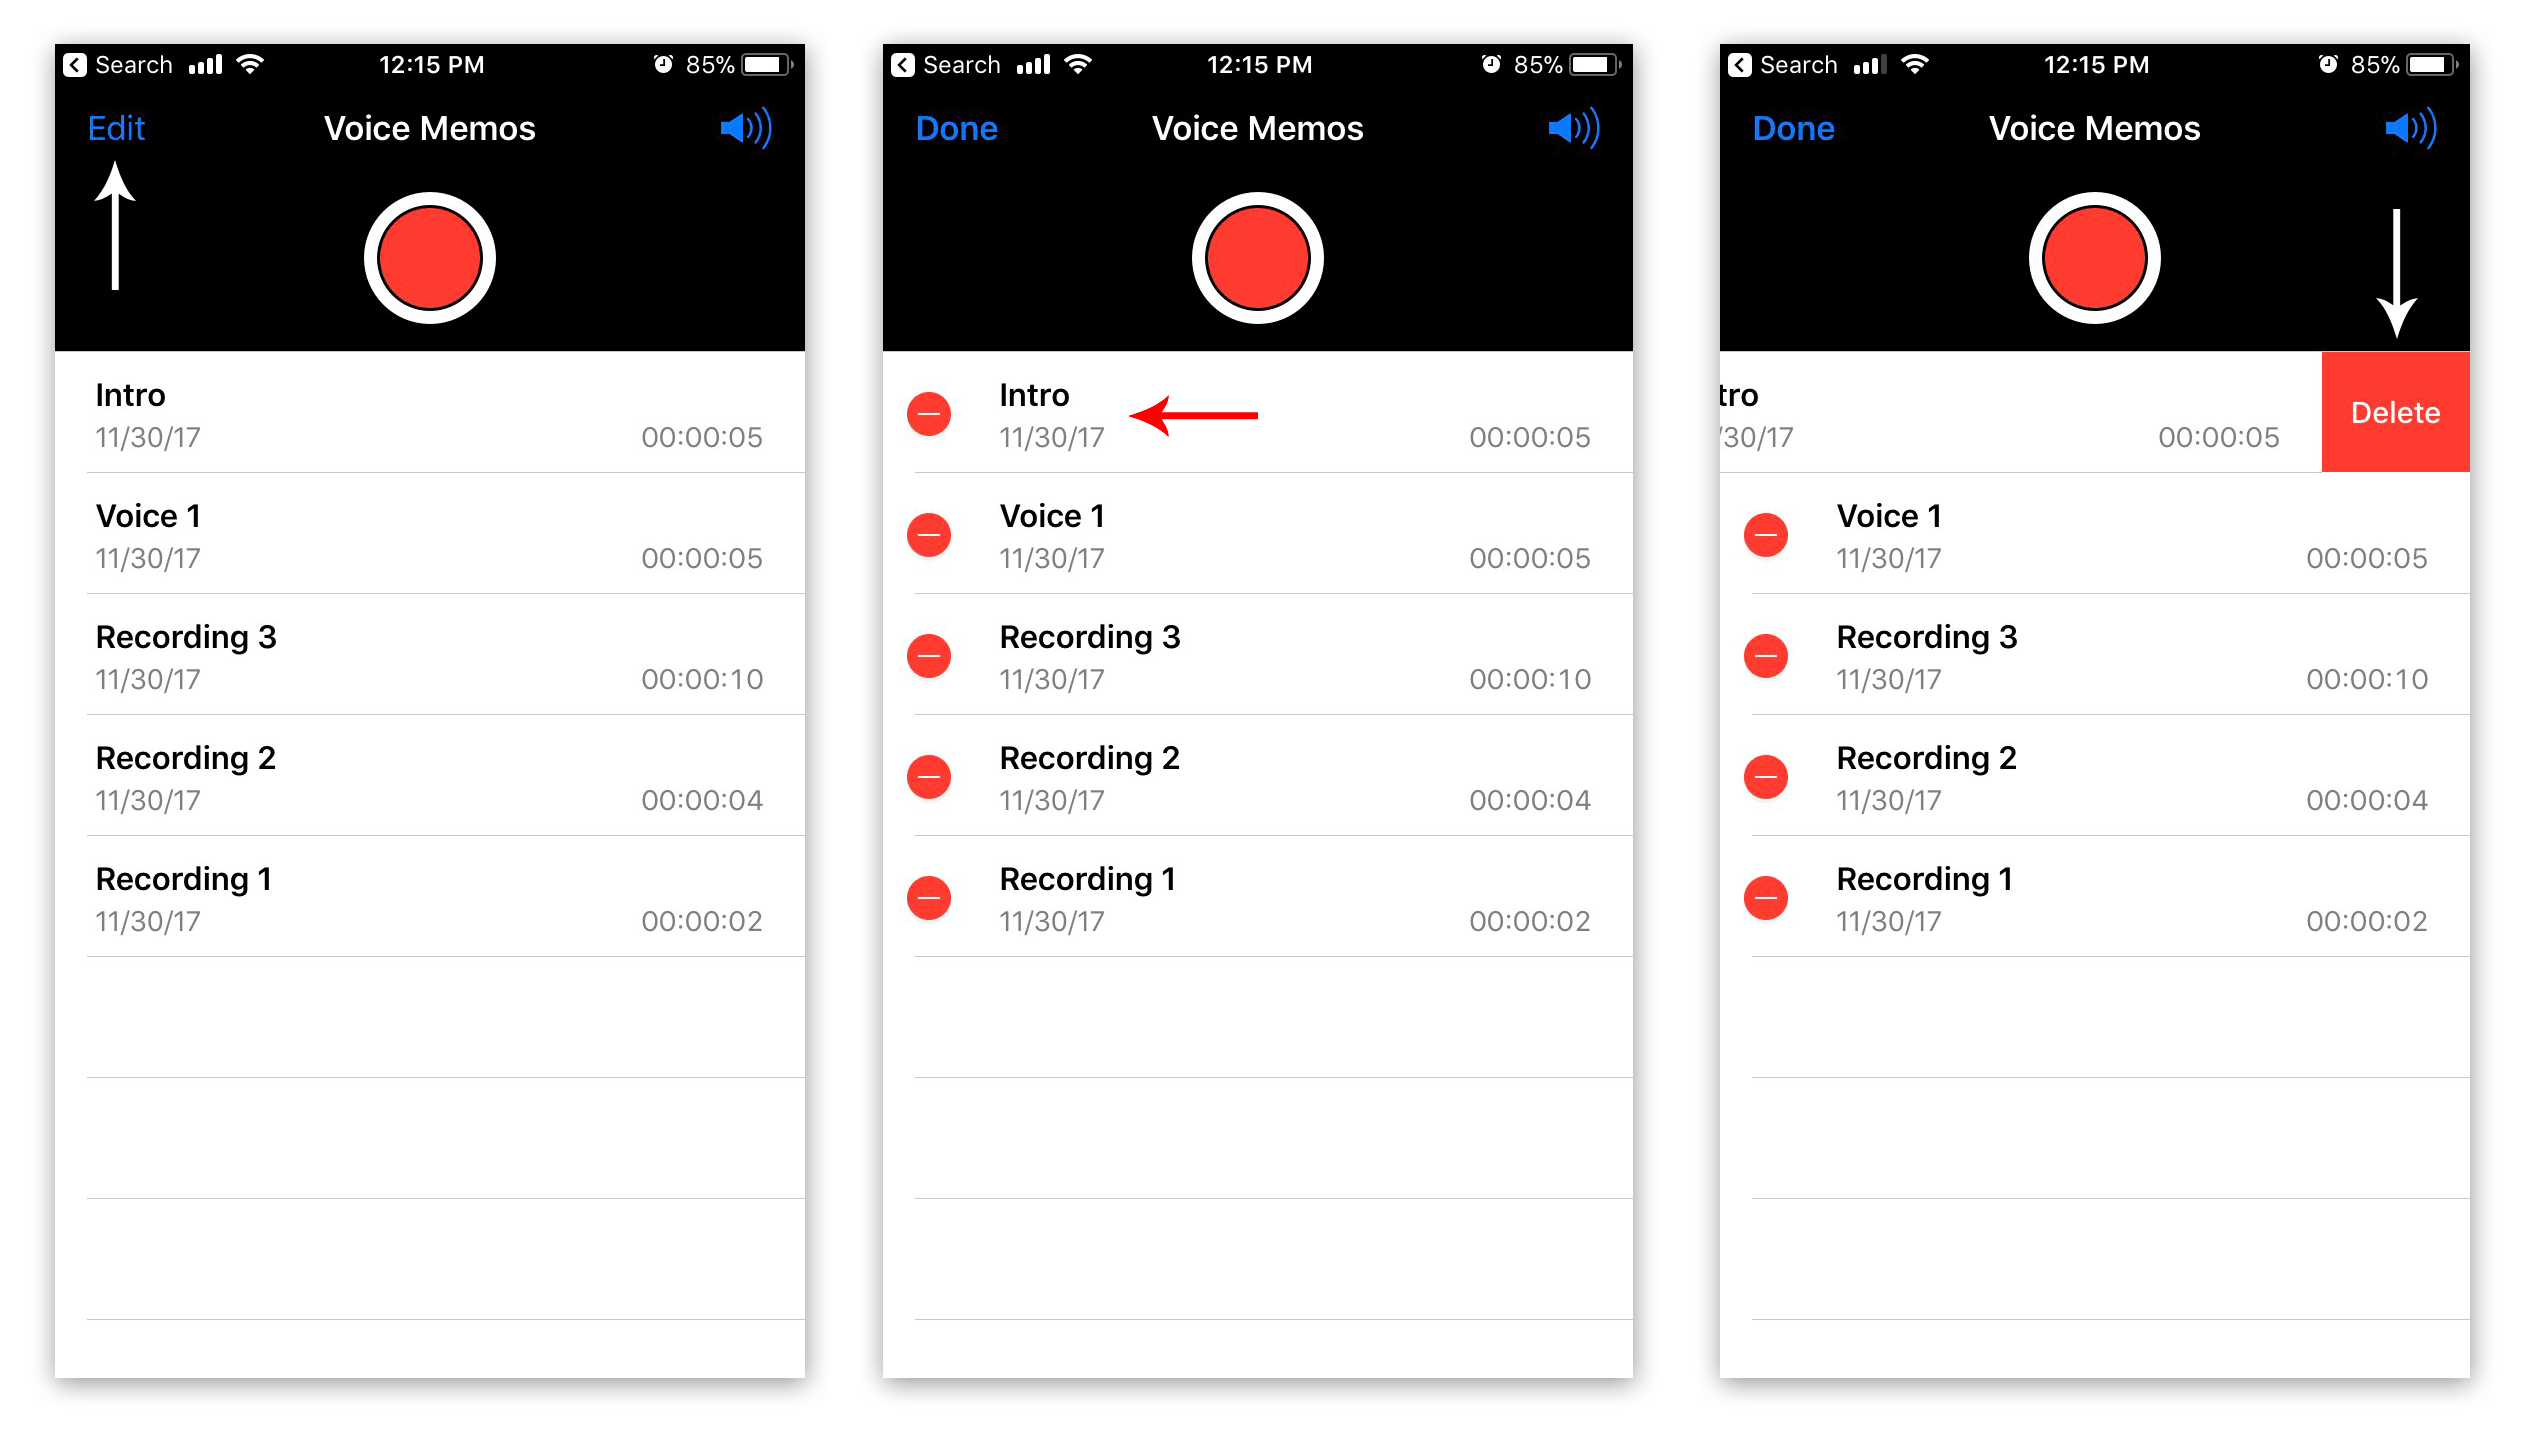 Voice Memos application - Follow the steps to delete unneeded records